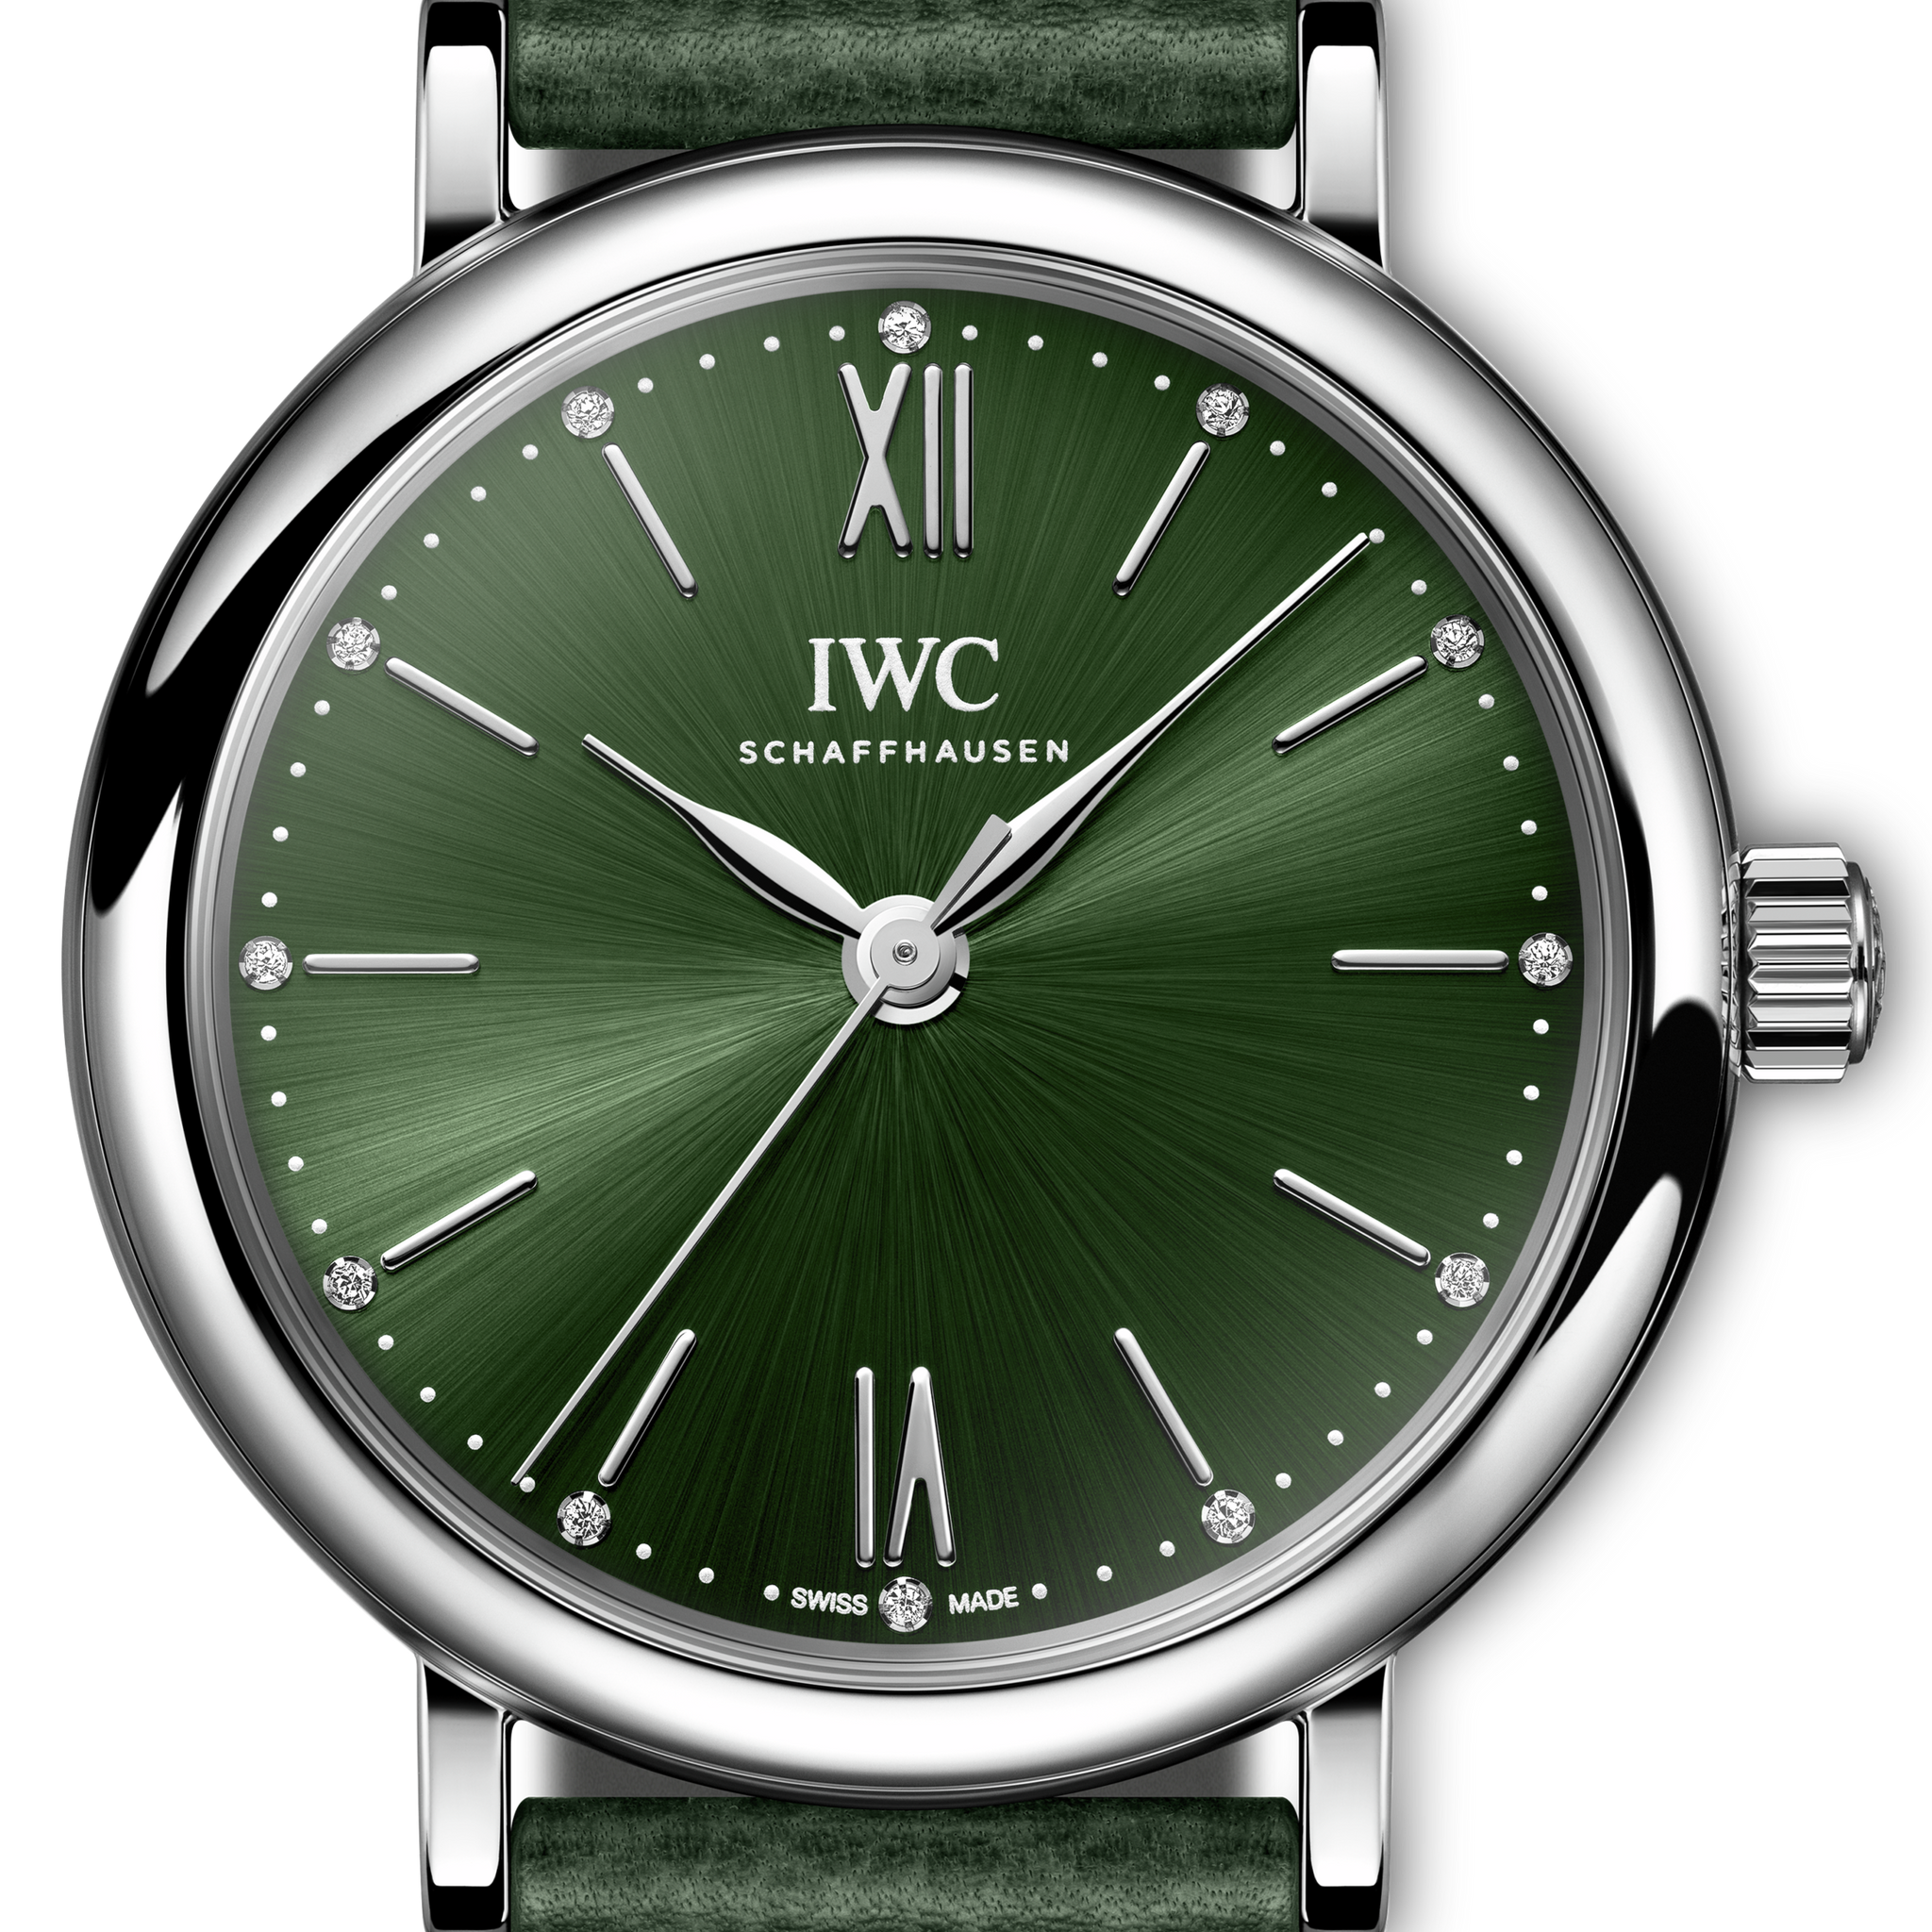 IWC Portofino Automatic Automatic Green Dial Green Leather Strap Watch for Women - IW357412